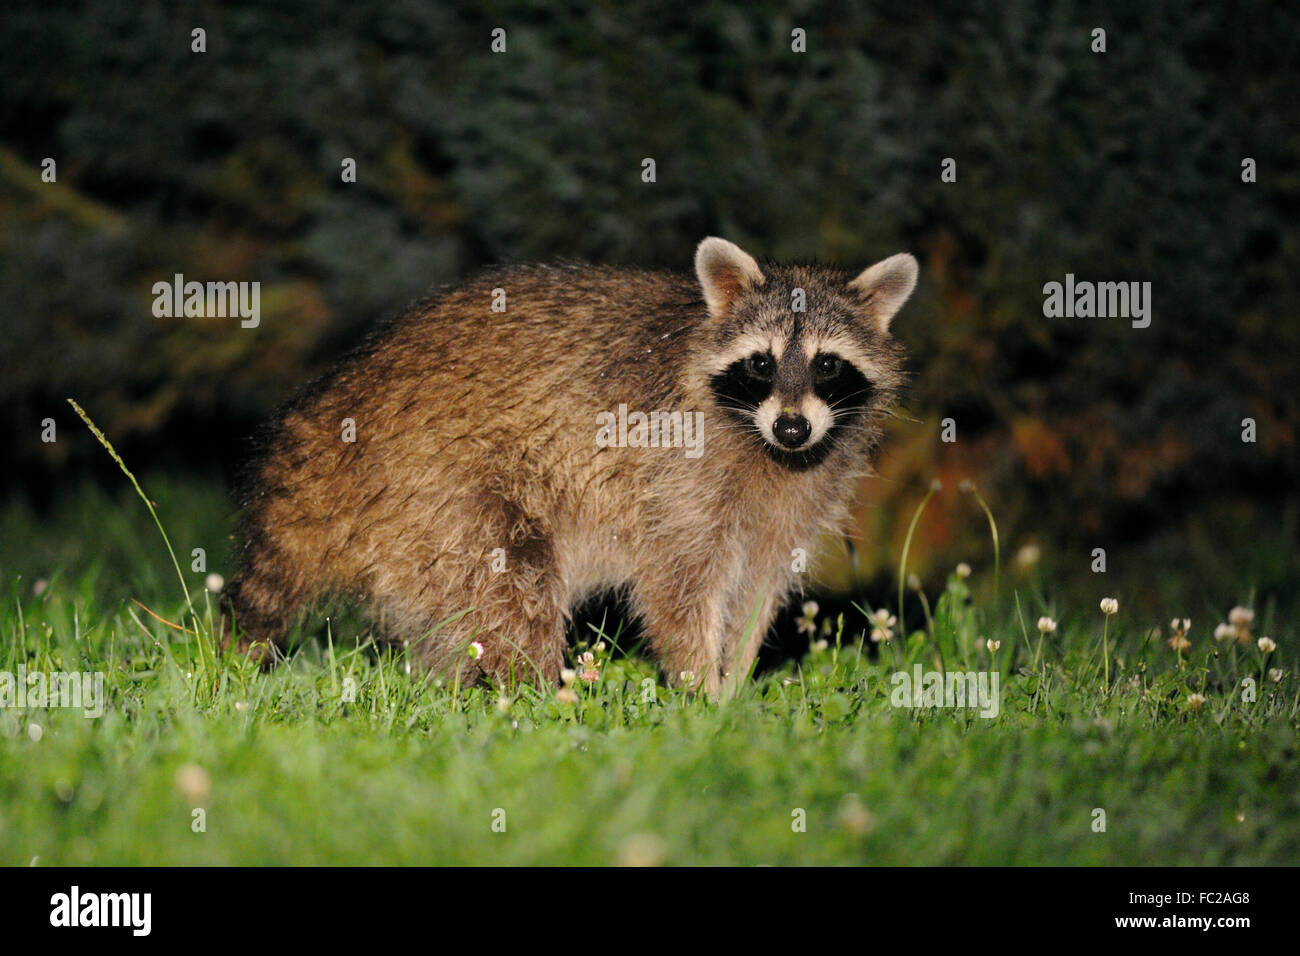 Common Raccoon ( Procyon lotor ) looks surprised, stands in front of some bushes, late in the night, wildlife, Germany. Stock Photo